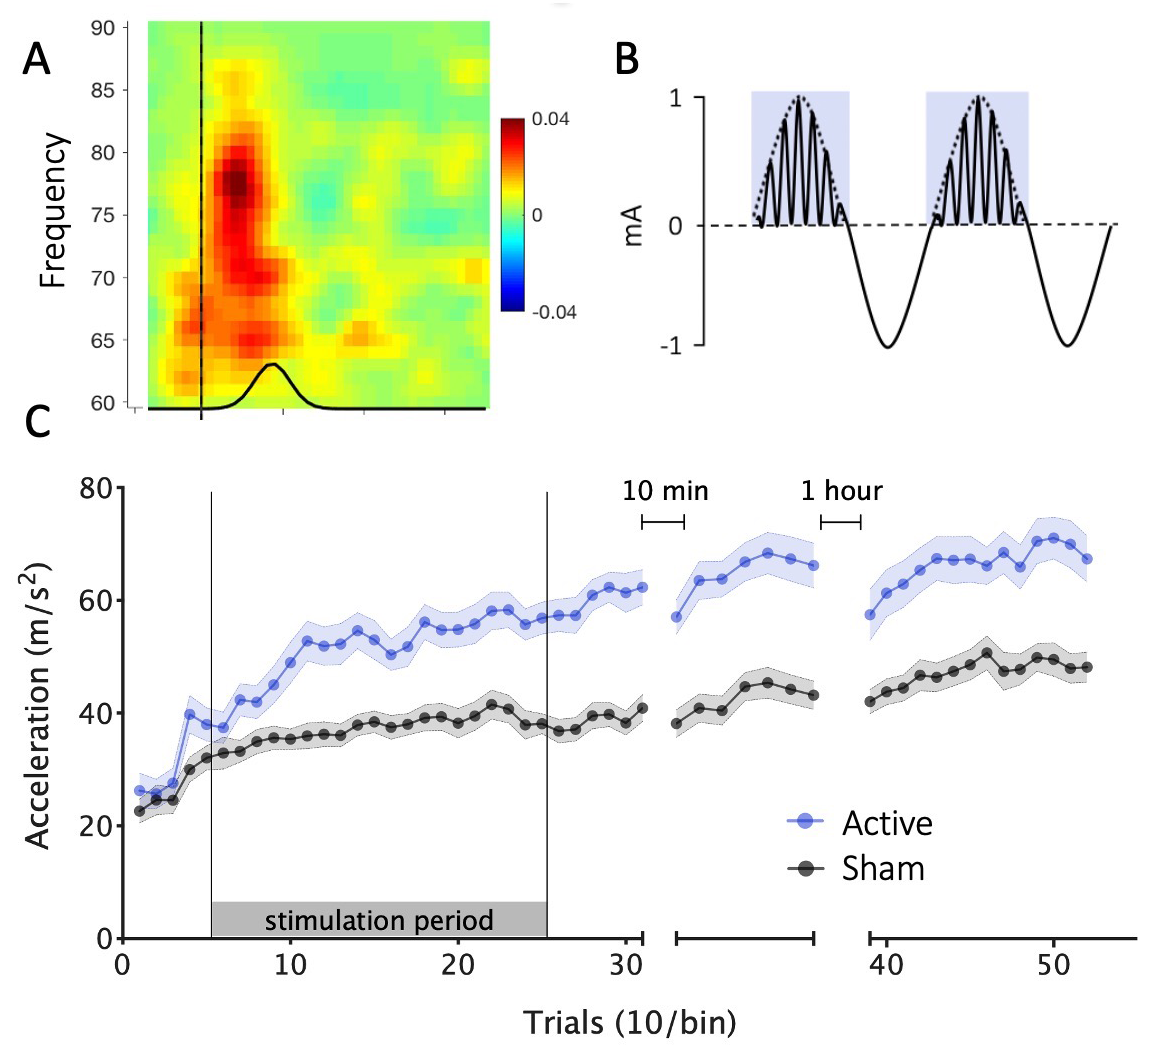 Top left panel shows a coloured graph of brain activity. Top right panel shows cartoon of the electrical stimulation patterns that were delivered to the brain. Bottom panel is a graph showing the effects of brain stimulation on movement learning.